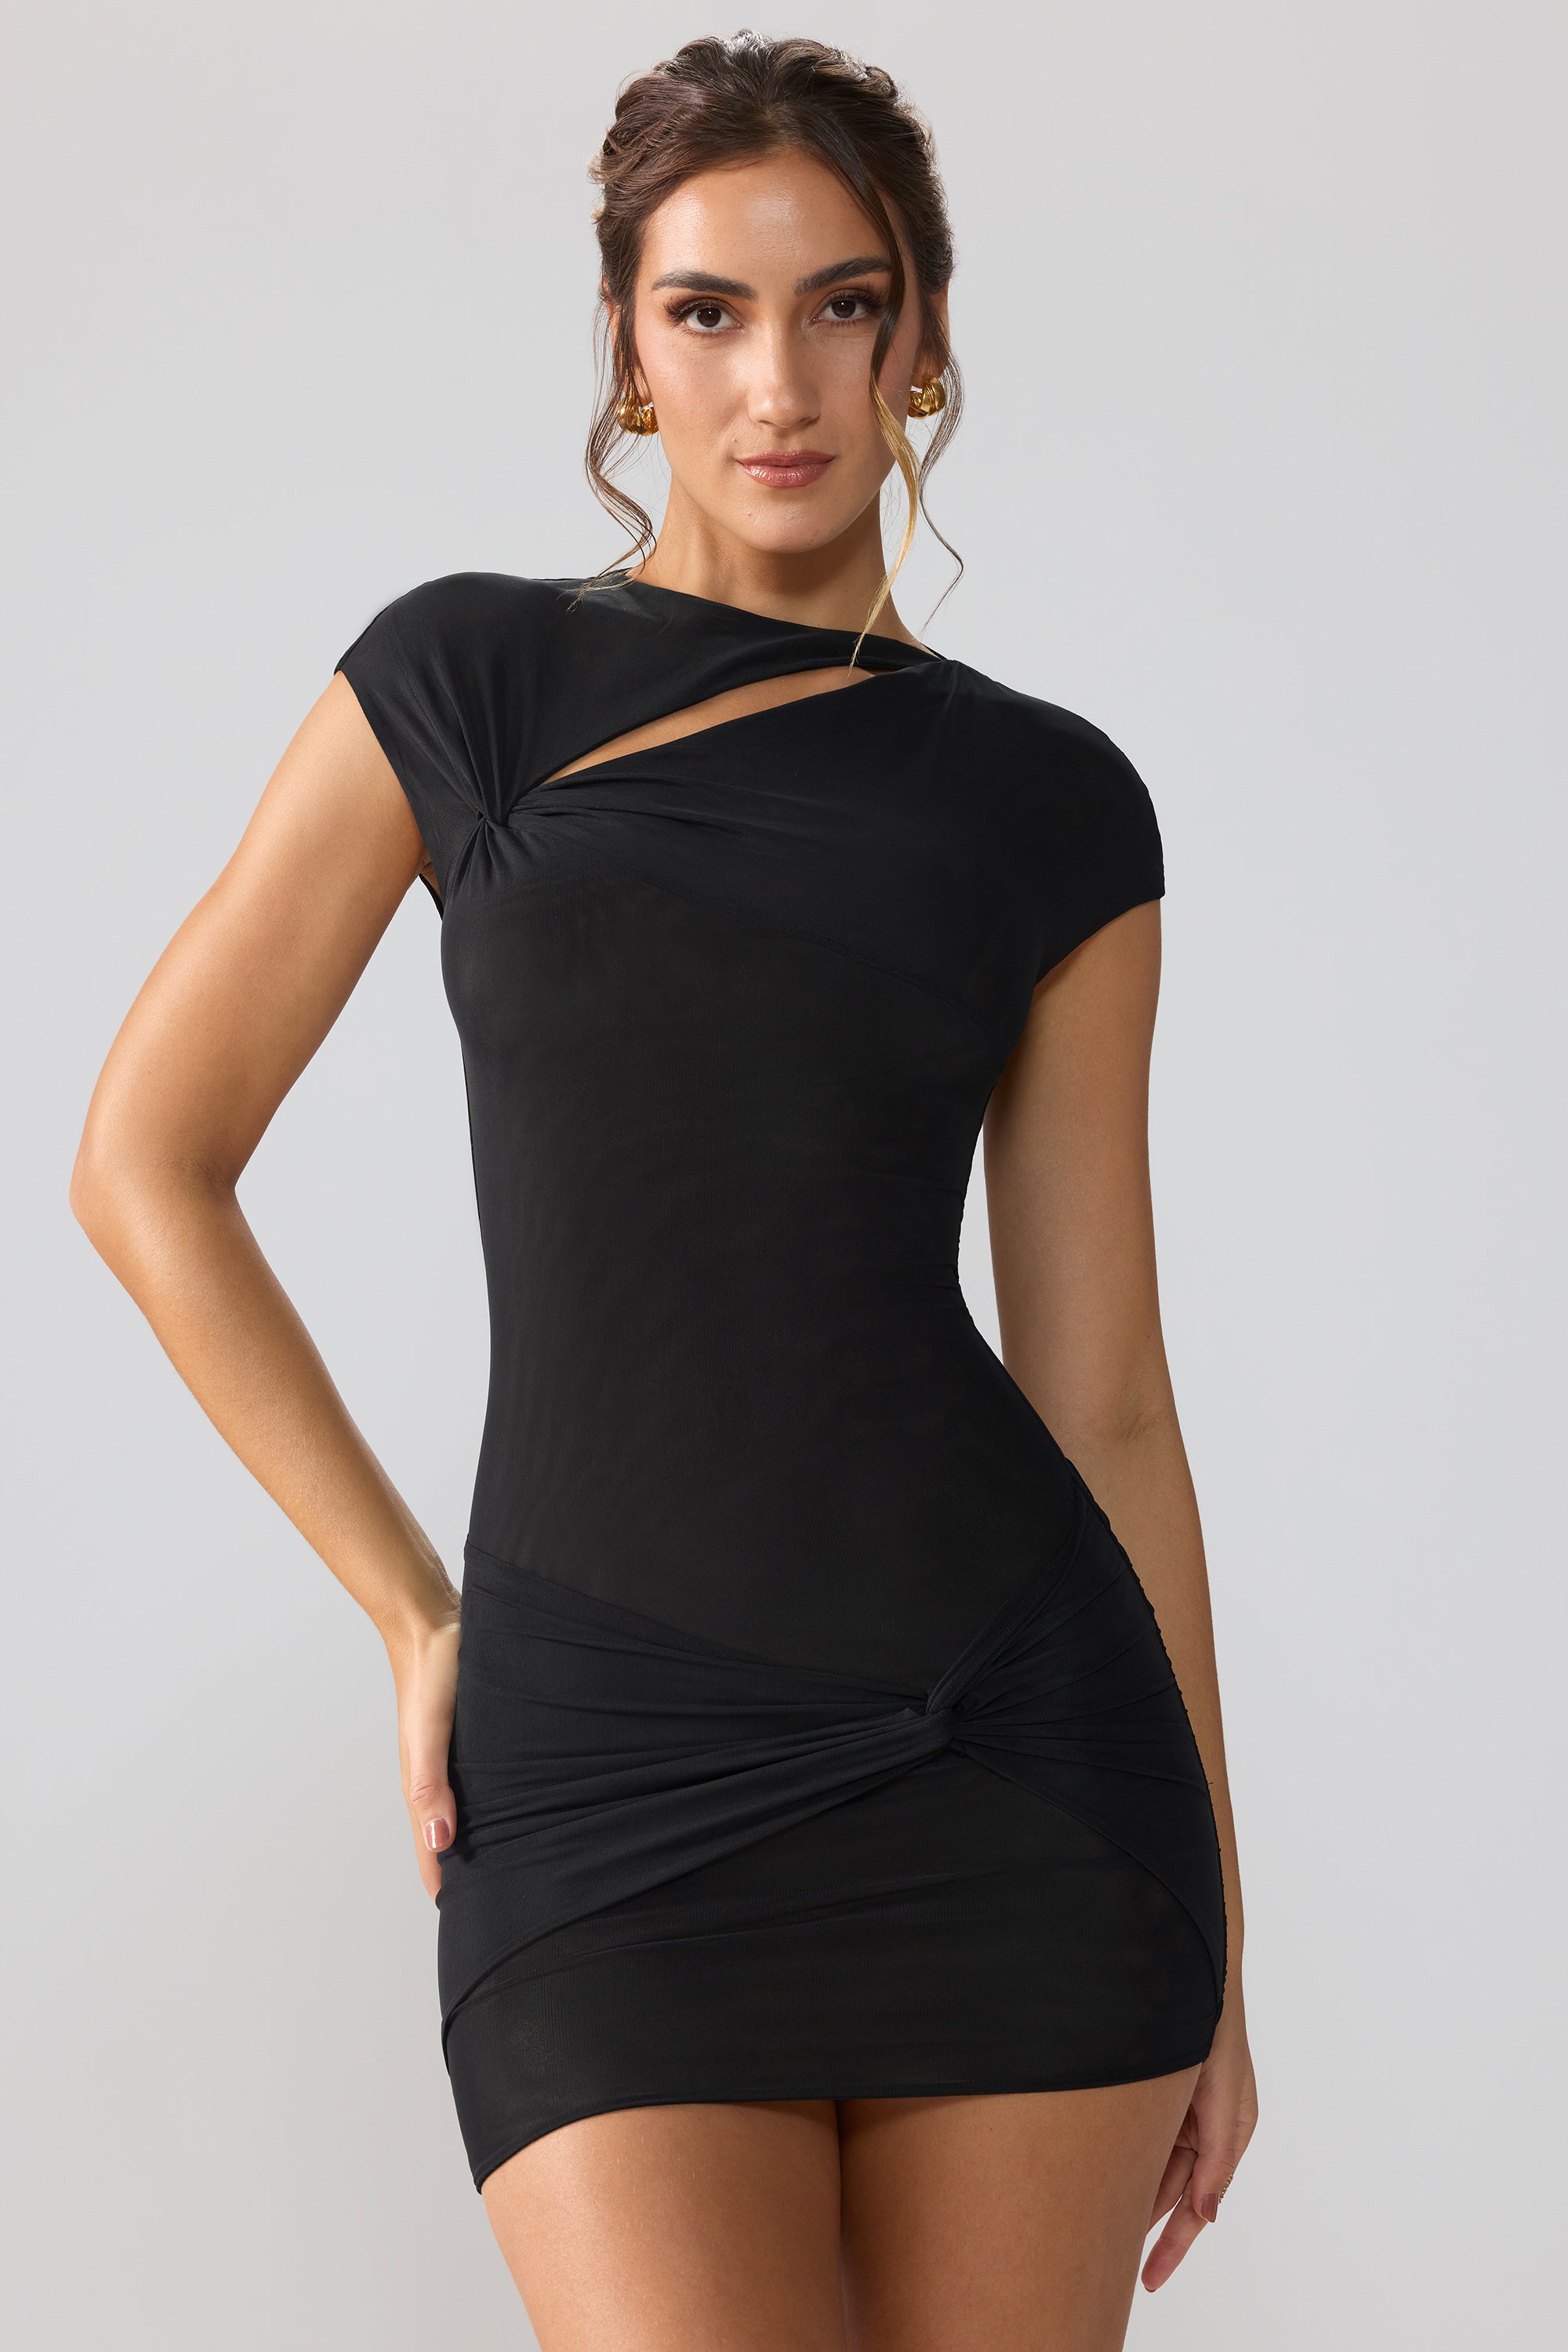 Cut-out bodycon dress - Black - Ladies | H&M IN